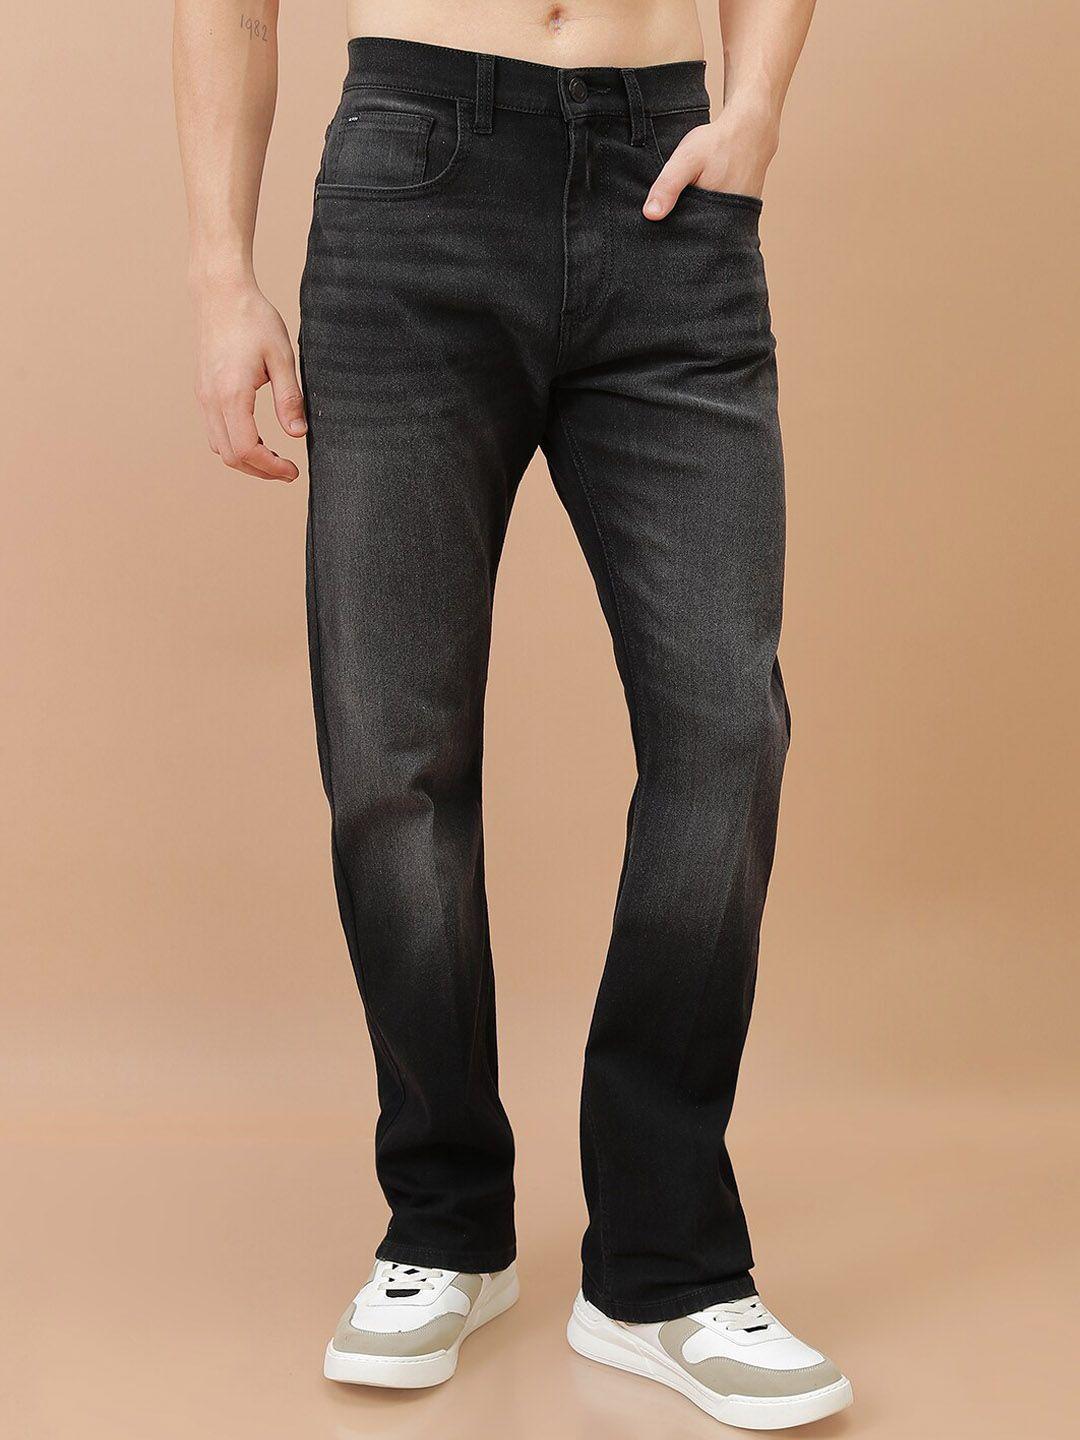 highlander-men-black-bootcut-mid-rise-light-fade-clean-look-stretchable-jeans